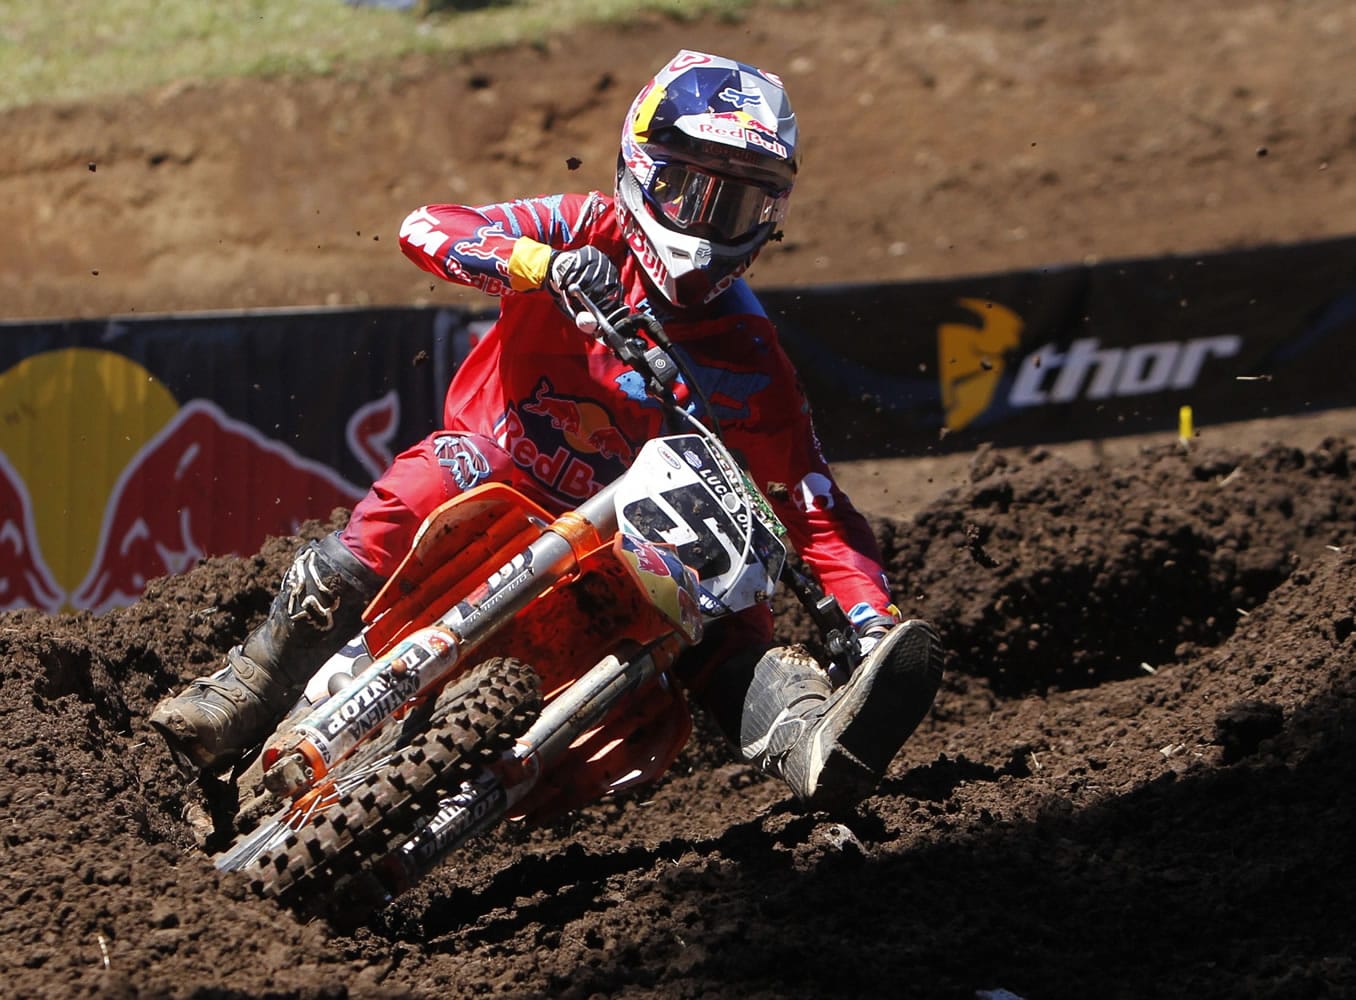 Ryan Dungey won both motos in the prestigious 450 races Saturday at Washougal MX National, claiming the overall title. It was his sixth win here in seven years, with two at 250.